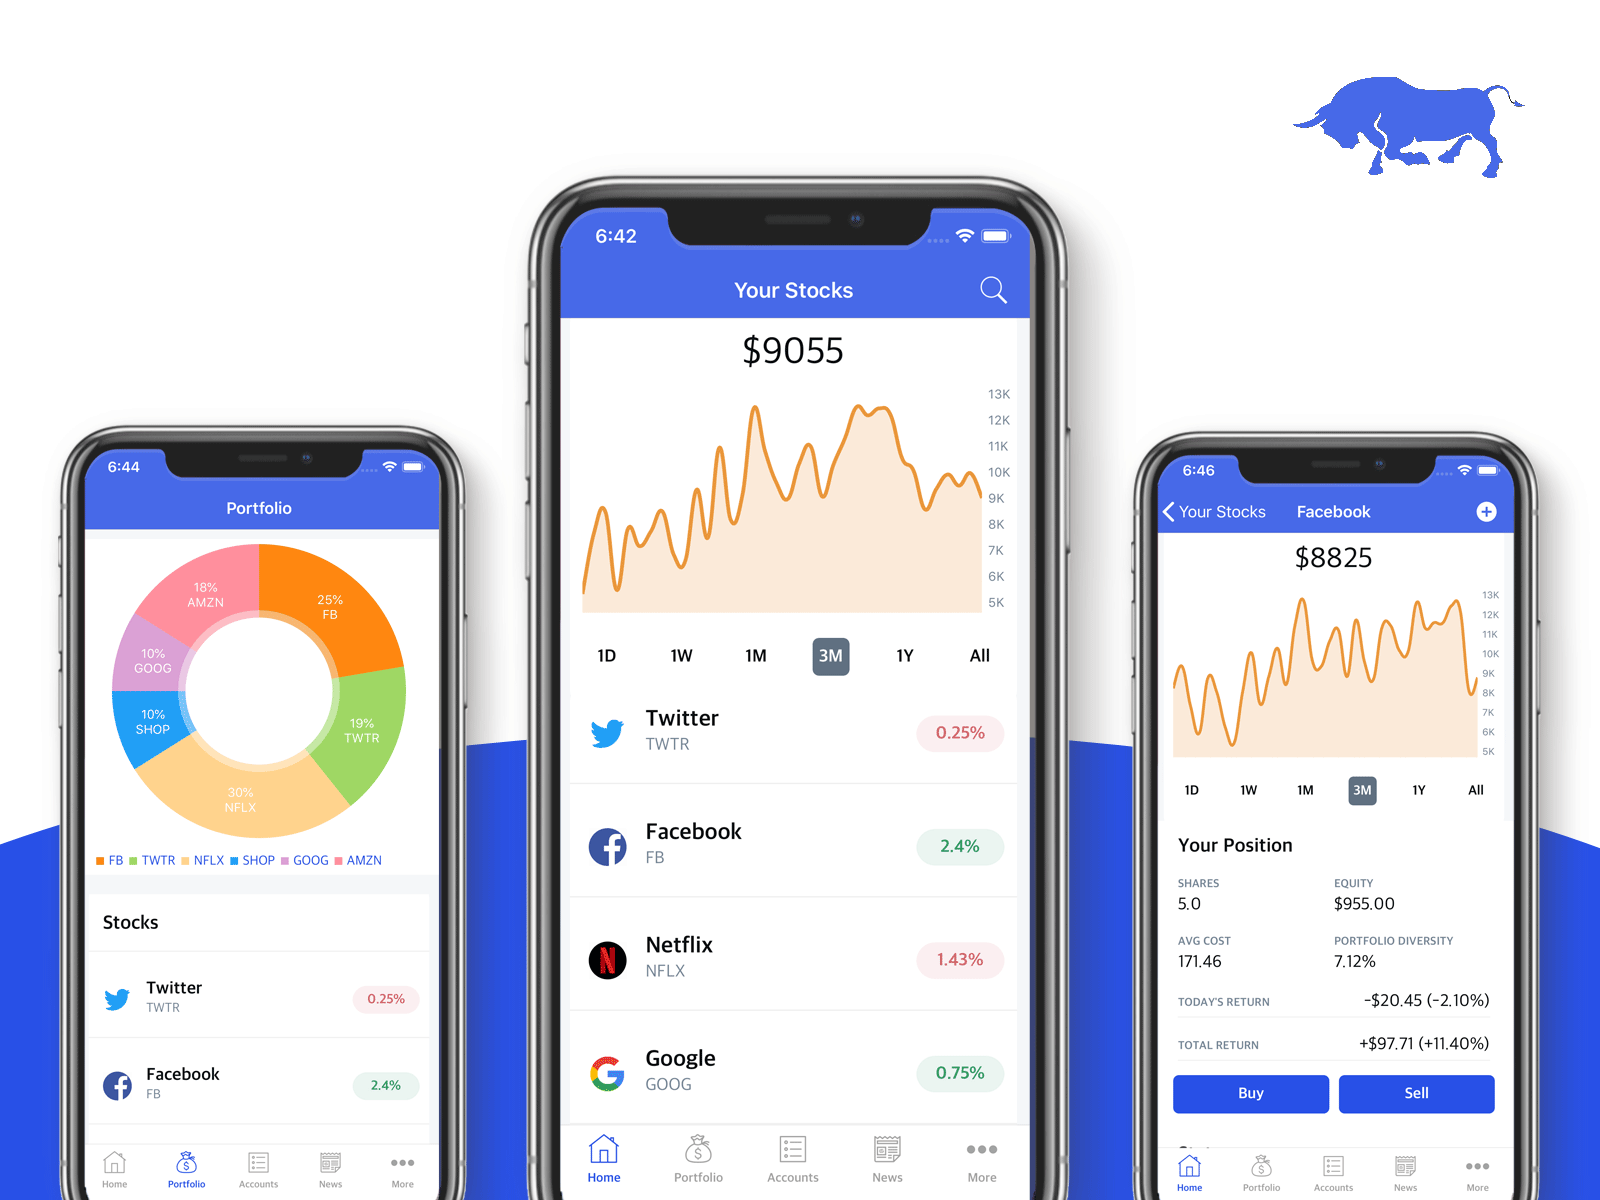 Professional application. Mobile trader приложение. Stocks приложение. Trading apps. Приложение для трейдинга.